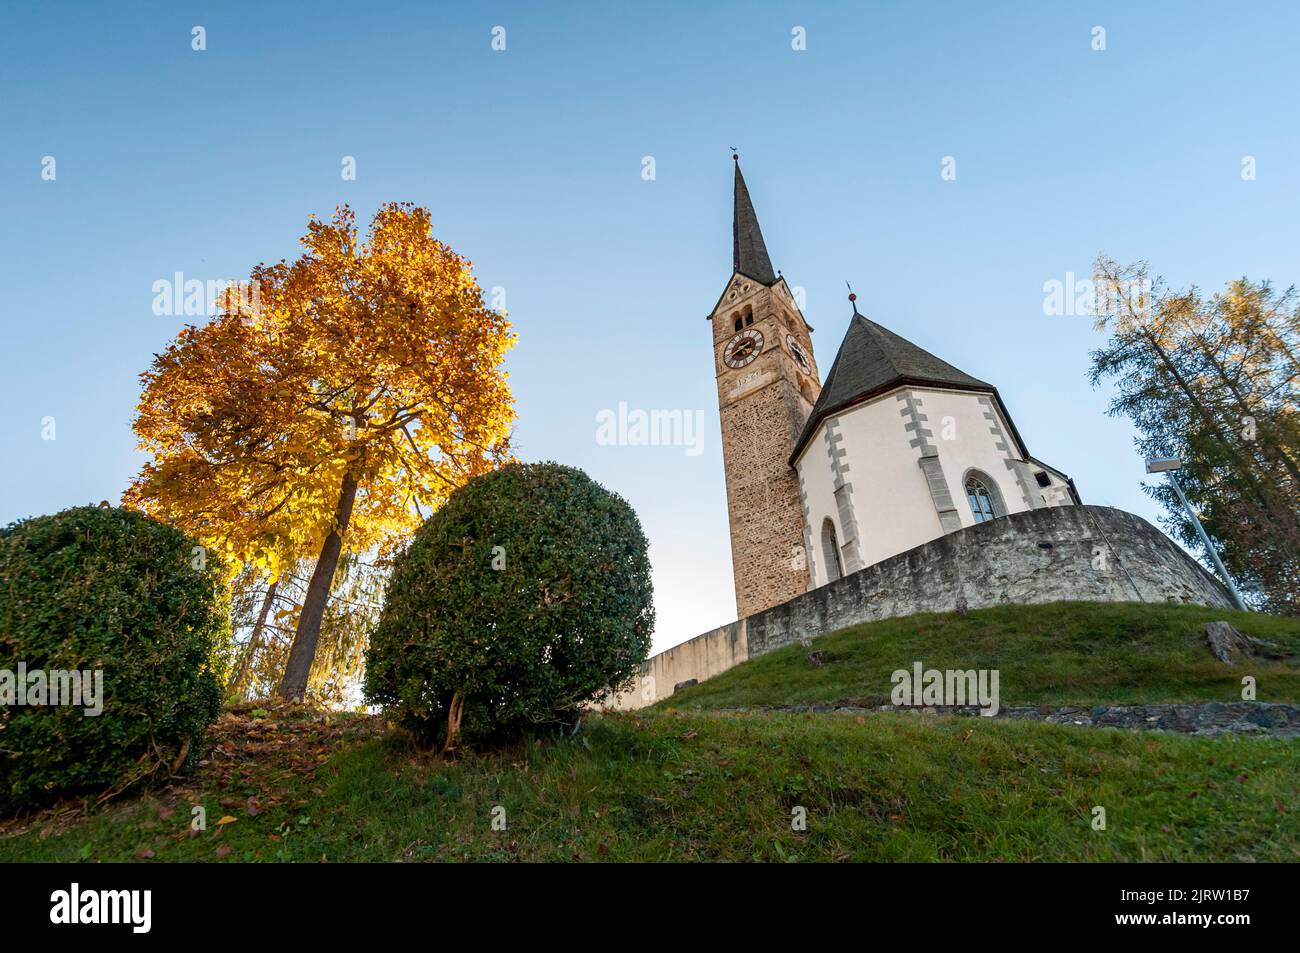 Reformed Church of Scuol town and river valley, Engadin, Switzerland on October 23, 2012. Stock Photo